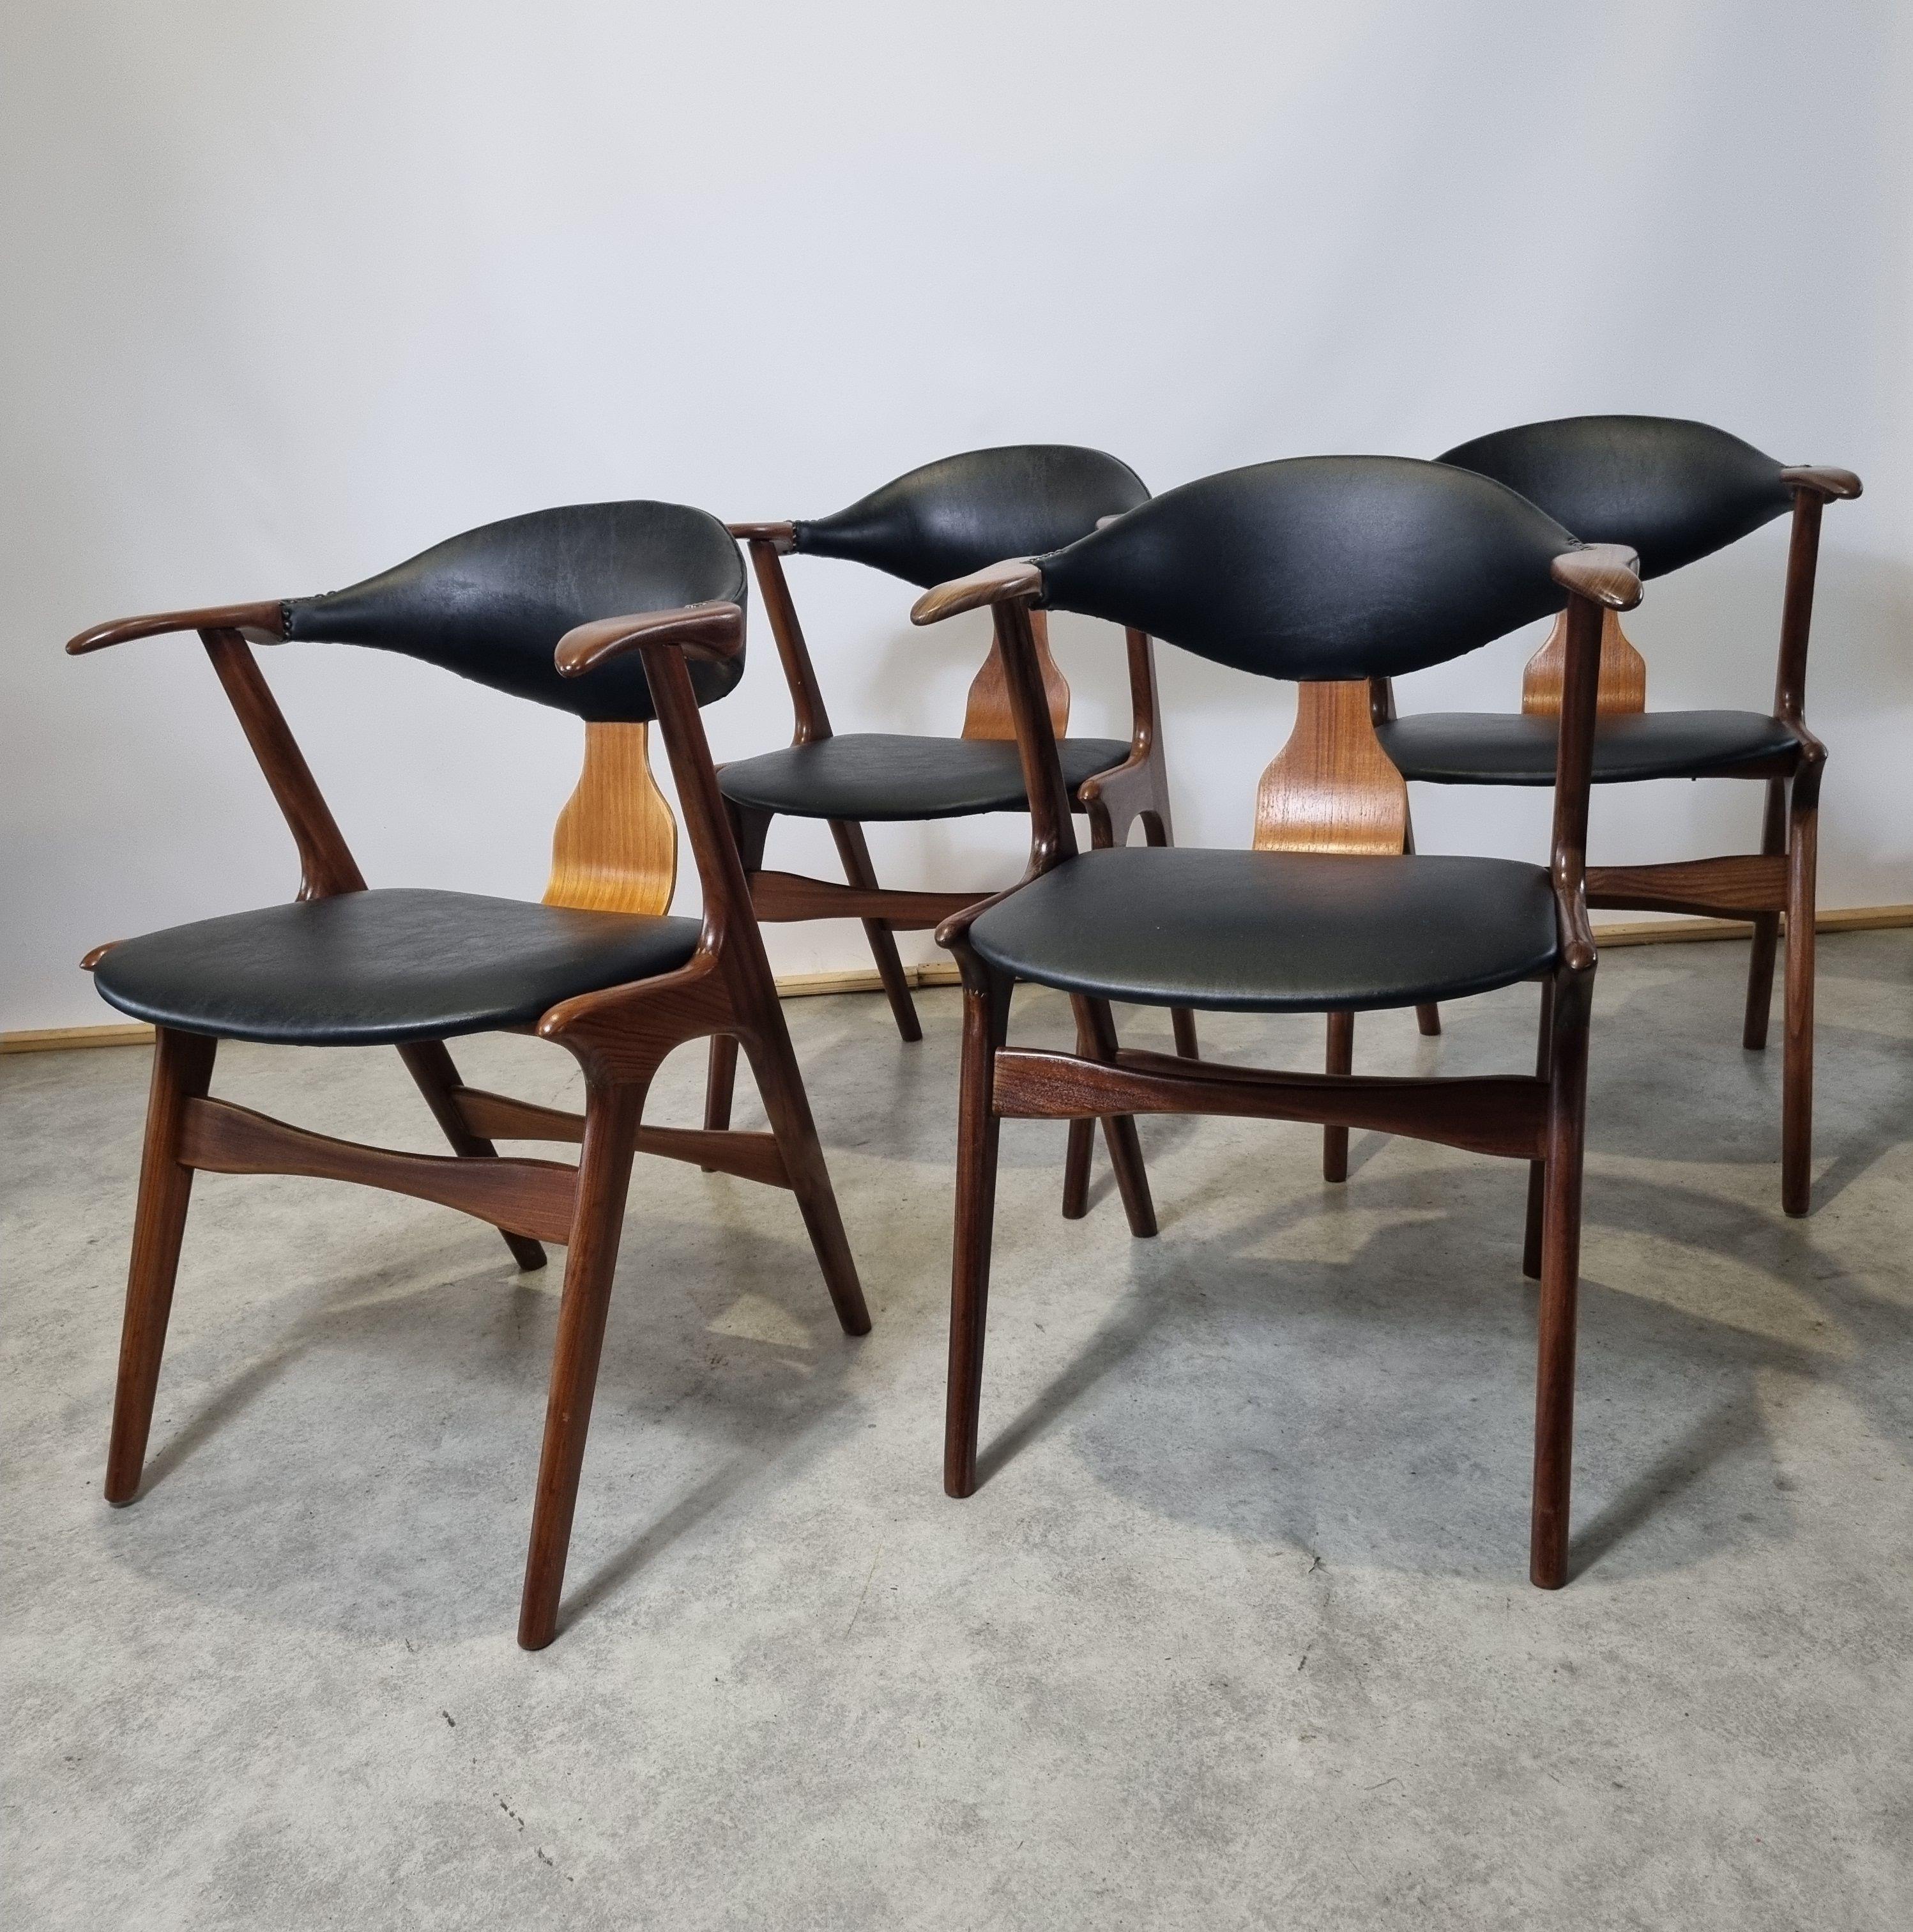 Designed by Louis van Teeffelen for Dutch AWA , made of solid teak. The chairs were reupholstered with high quality leatherette which resembles the original upholstery of this chair. Chairs are in perfect condition. The teak frame was refreshed and